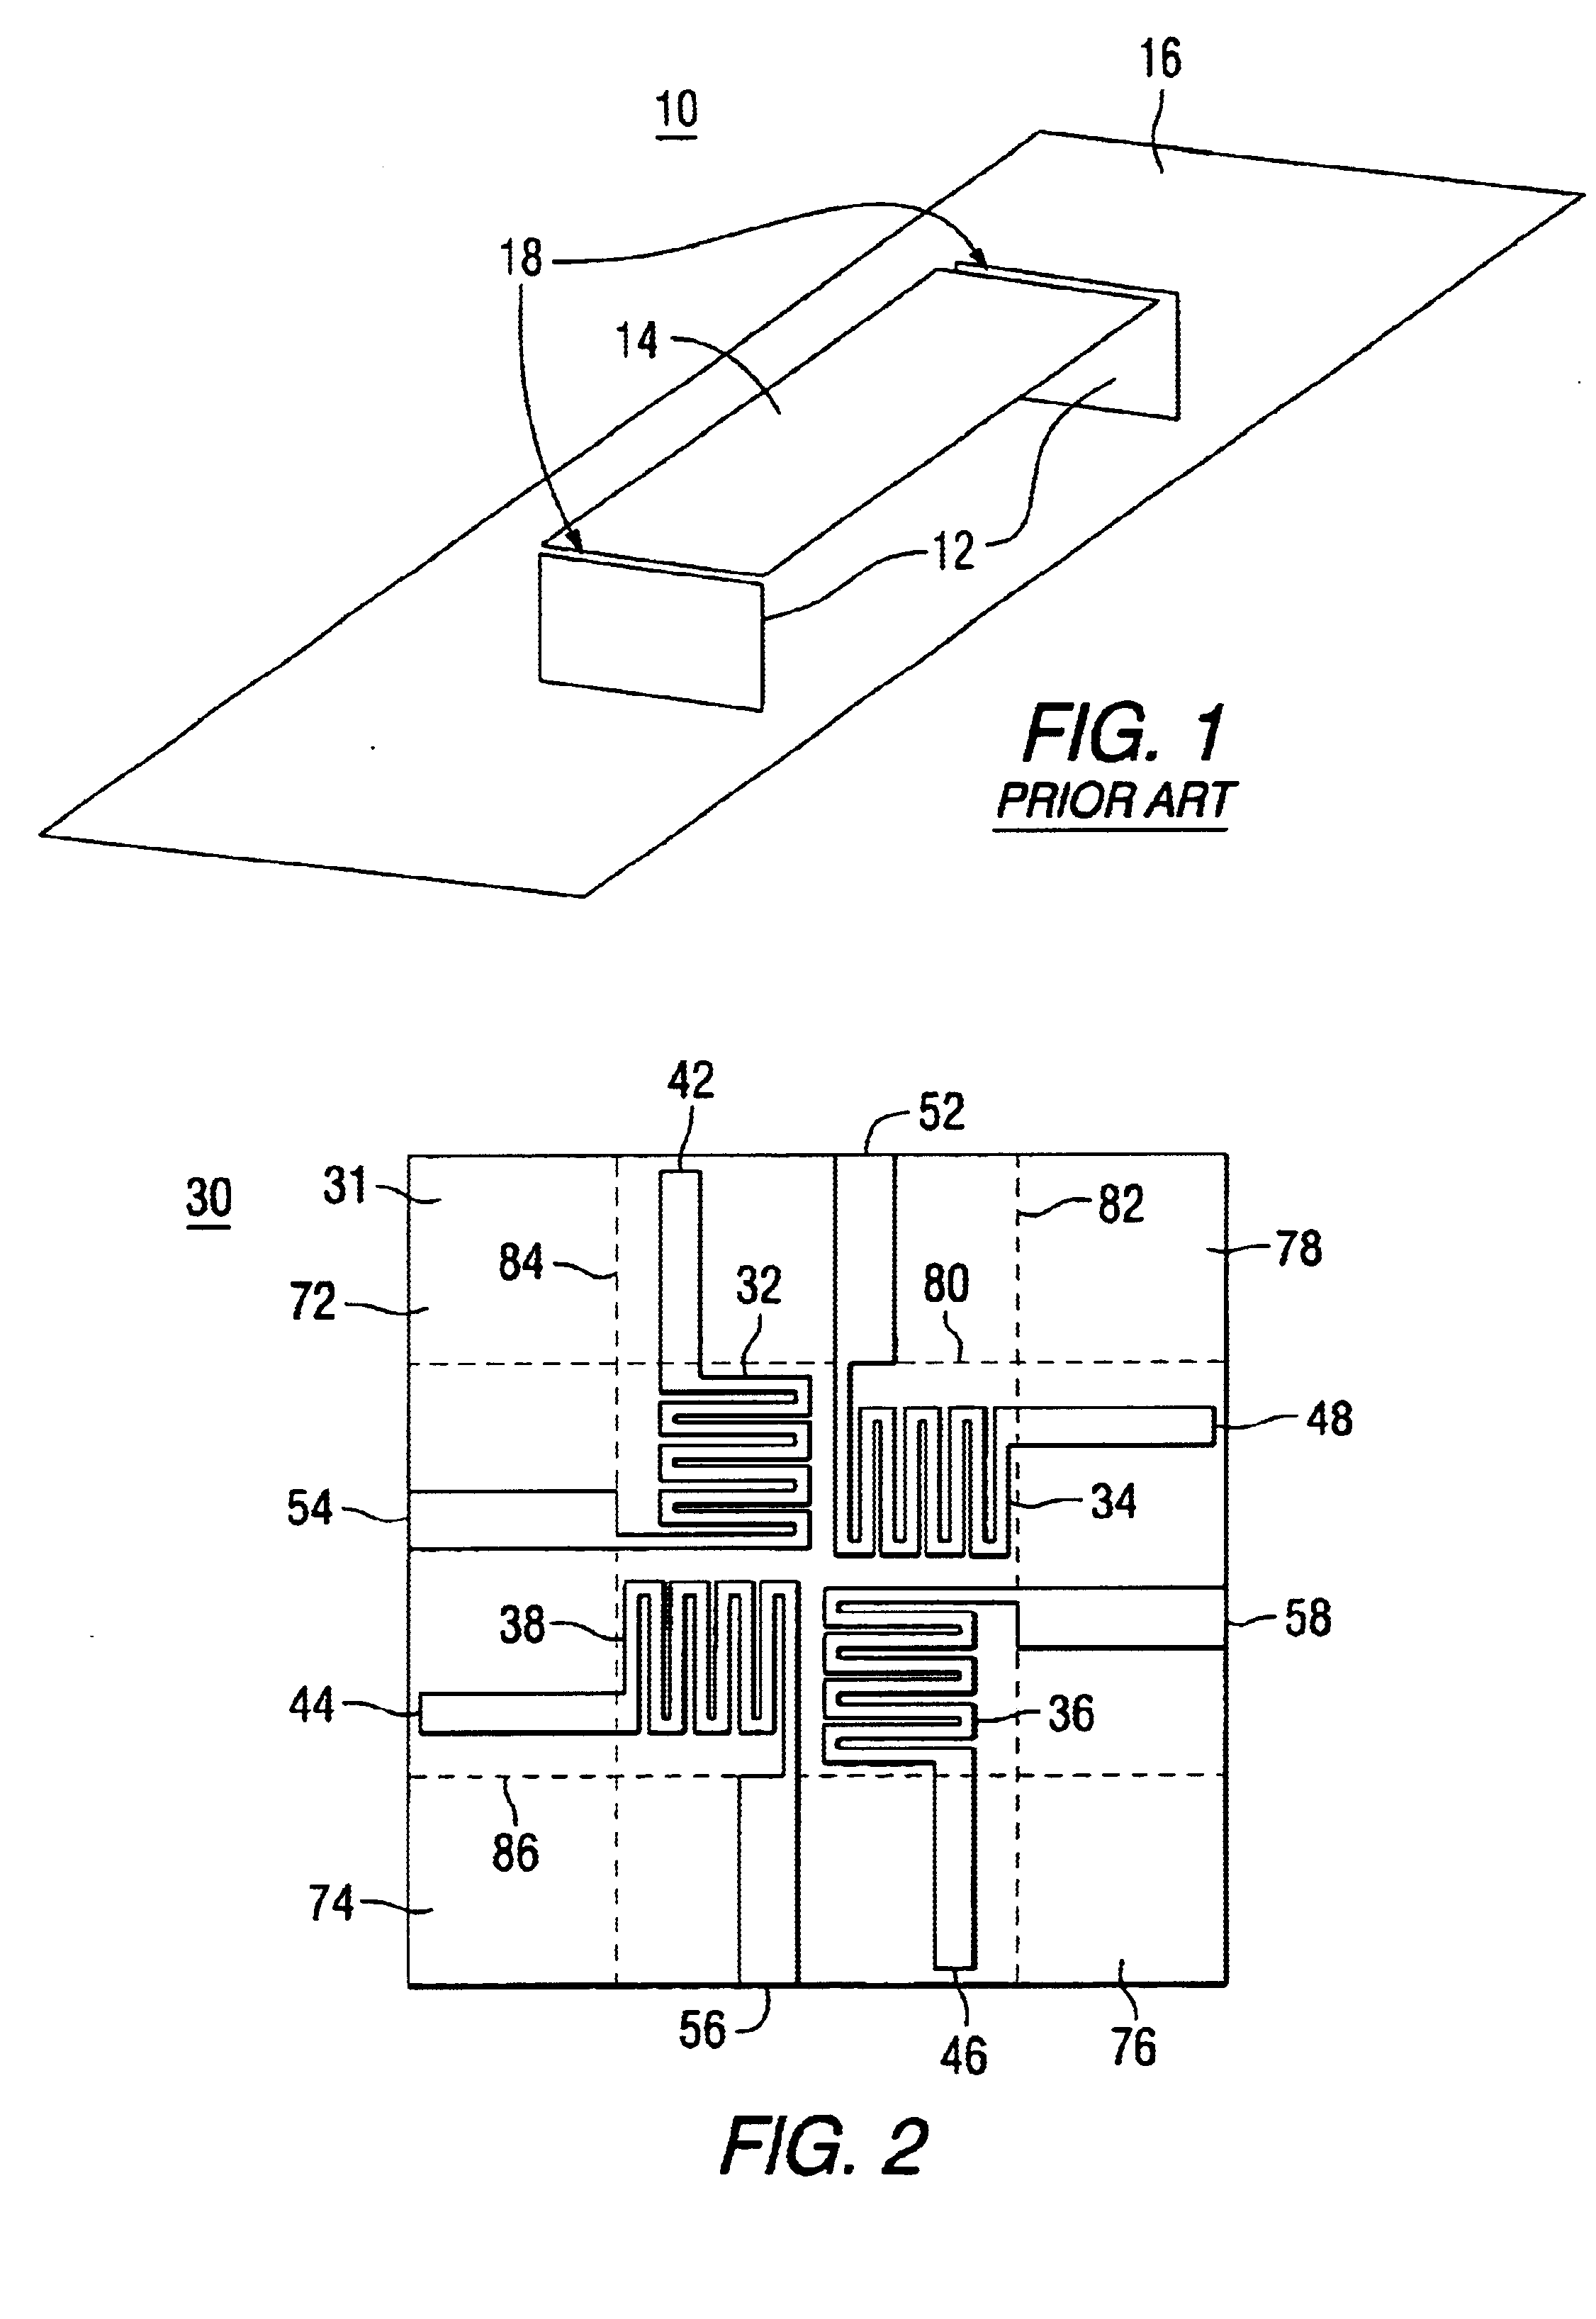 Fabrication method and apparatus for antenna structures in wireless communications devices